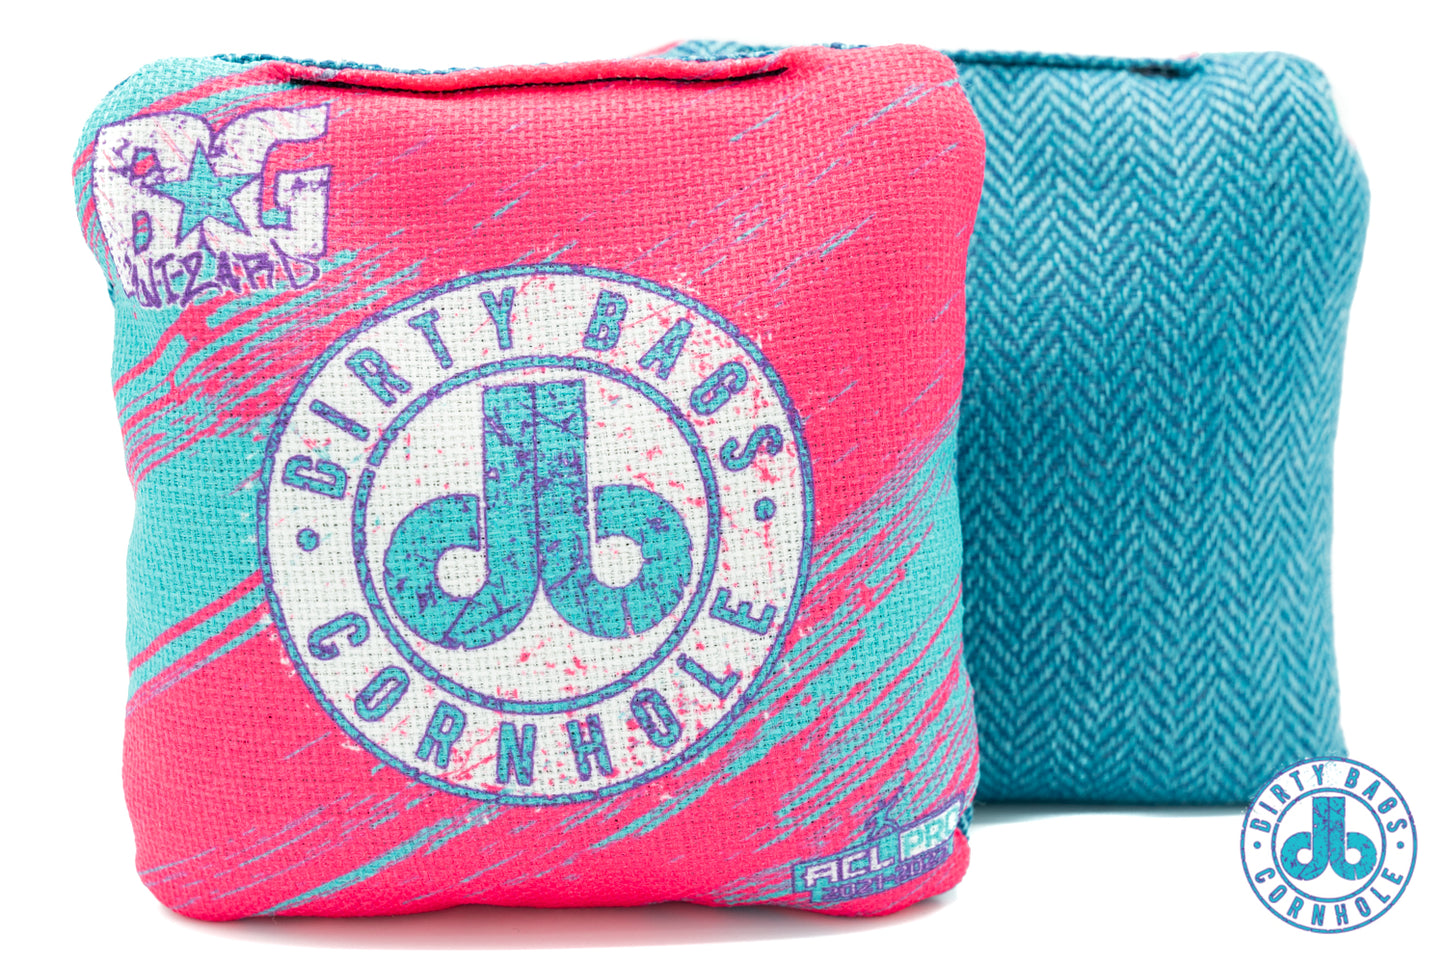 BG Cornhole Wizard dirty bags Grunge edition turquoise and pink